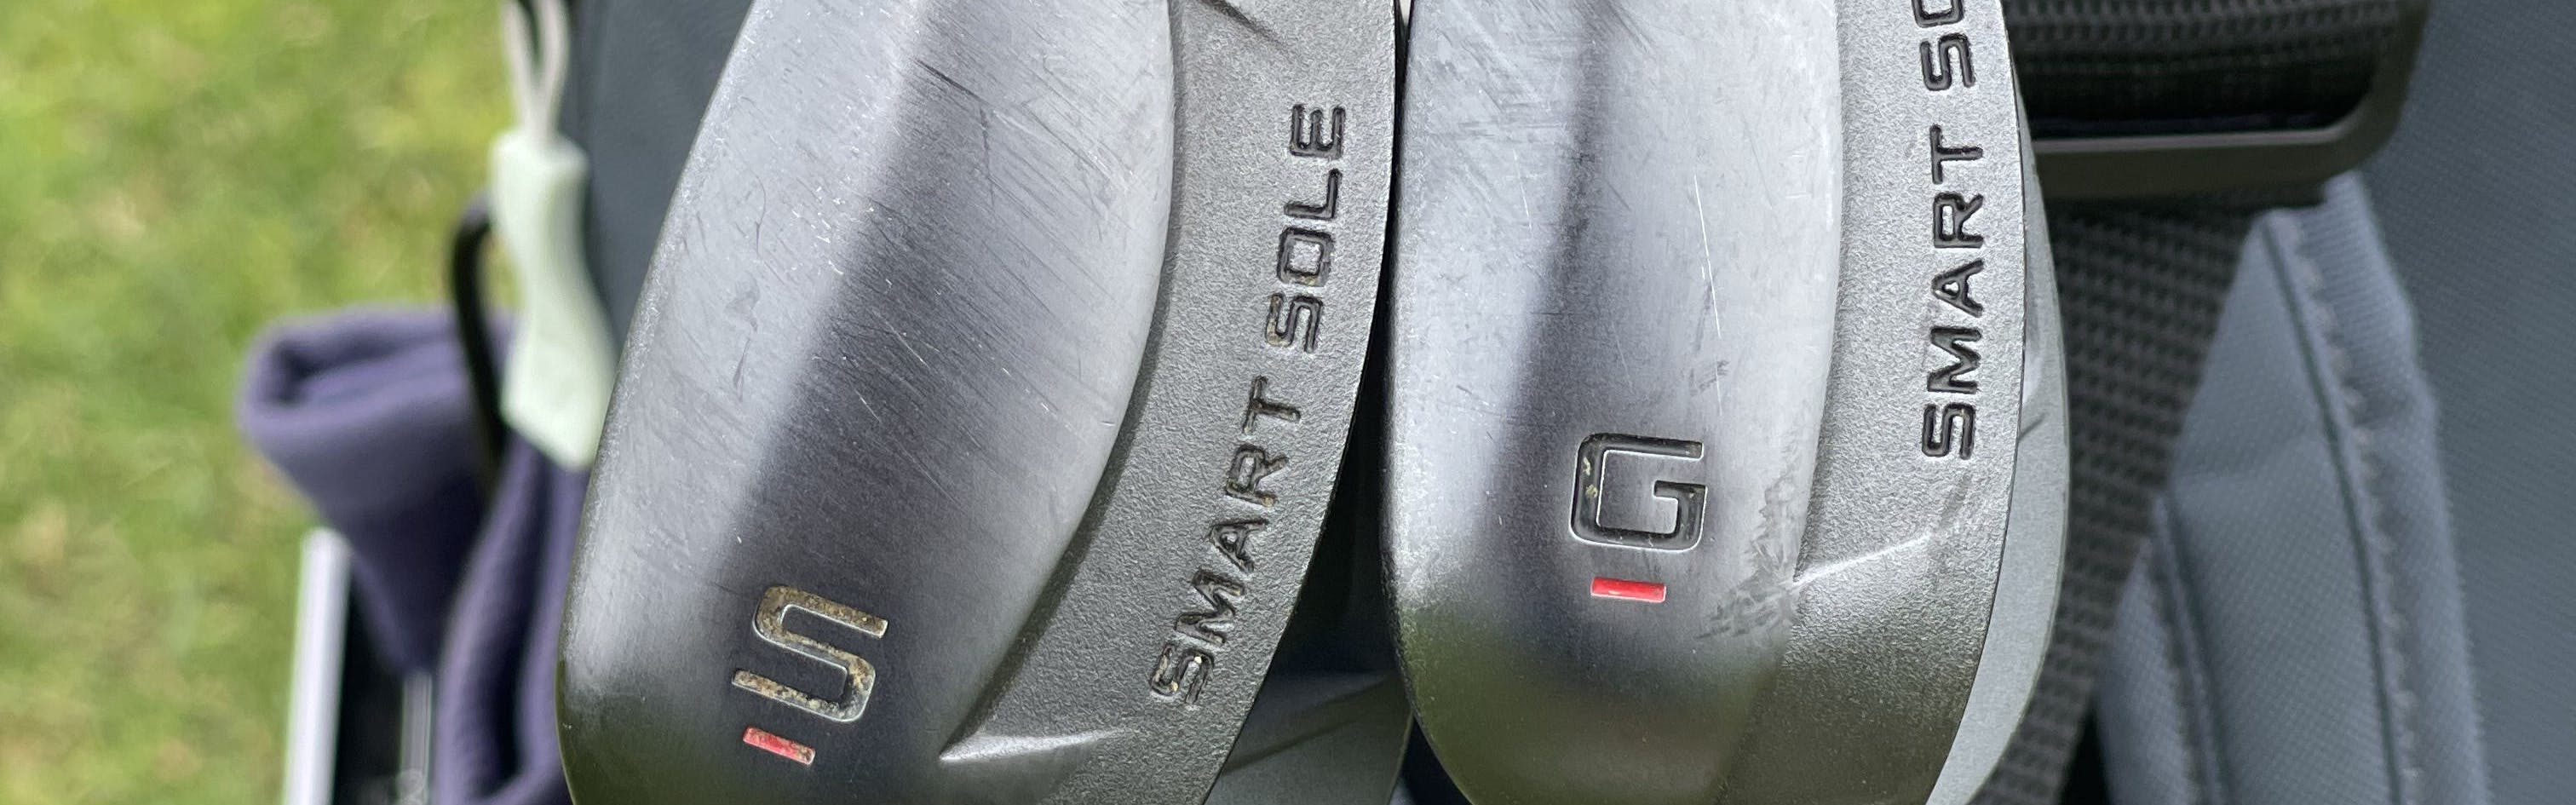 Two wedges in a golf bag.